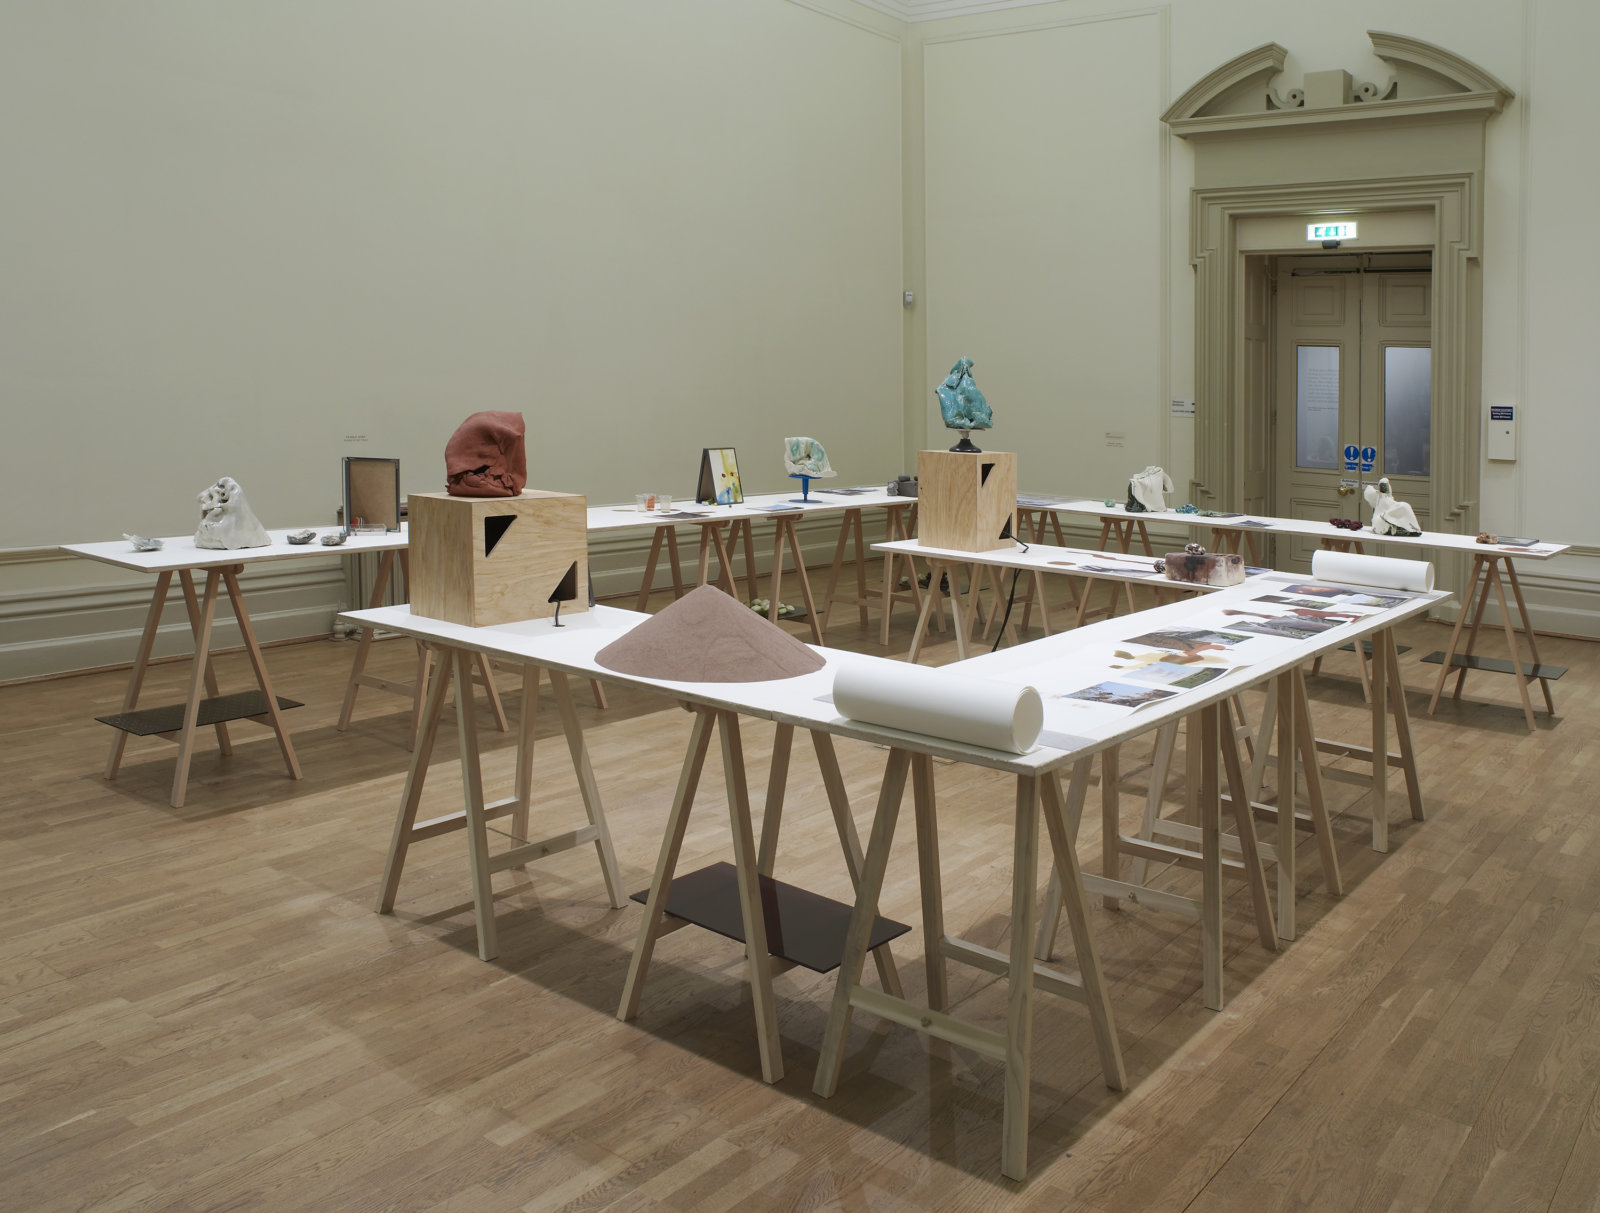 Christina Mackie, The Judges III, 2013, mixed media, dimensions variable. Installation view, Nottingham Castle Museum, 2013